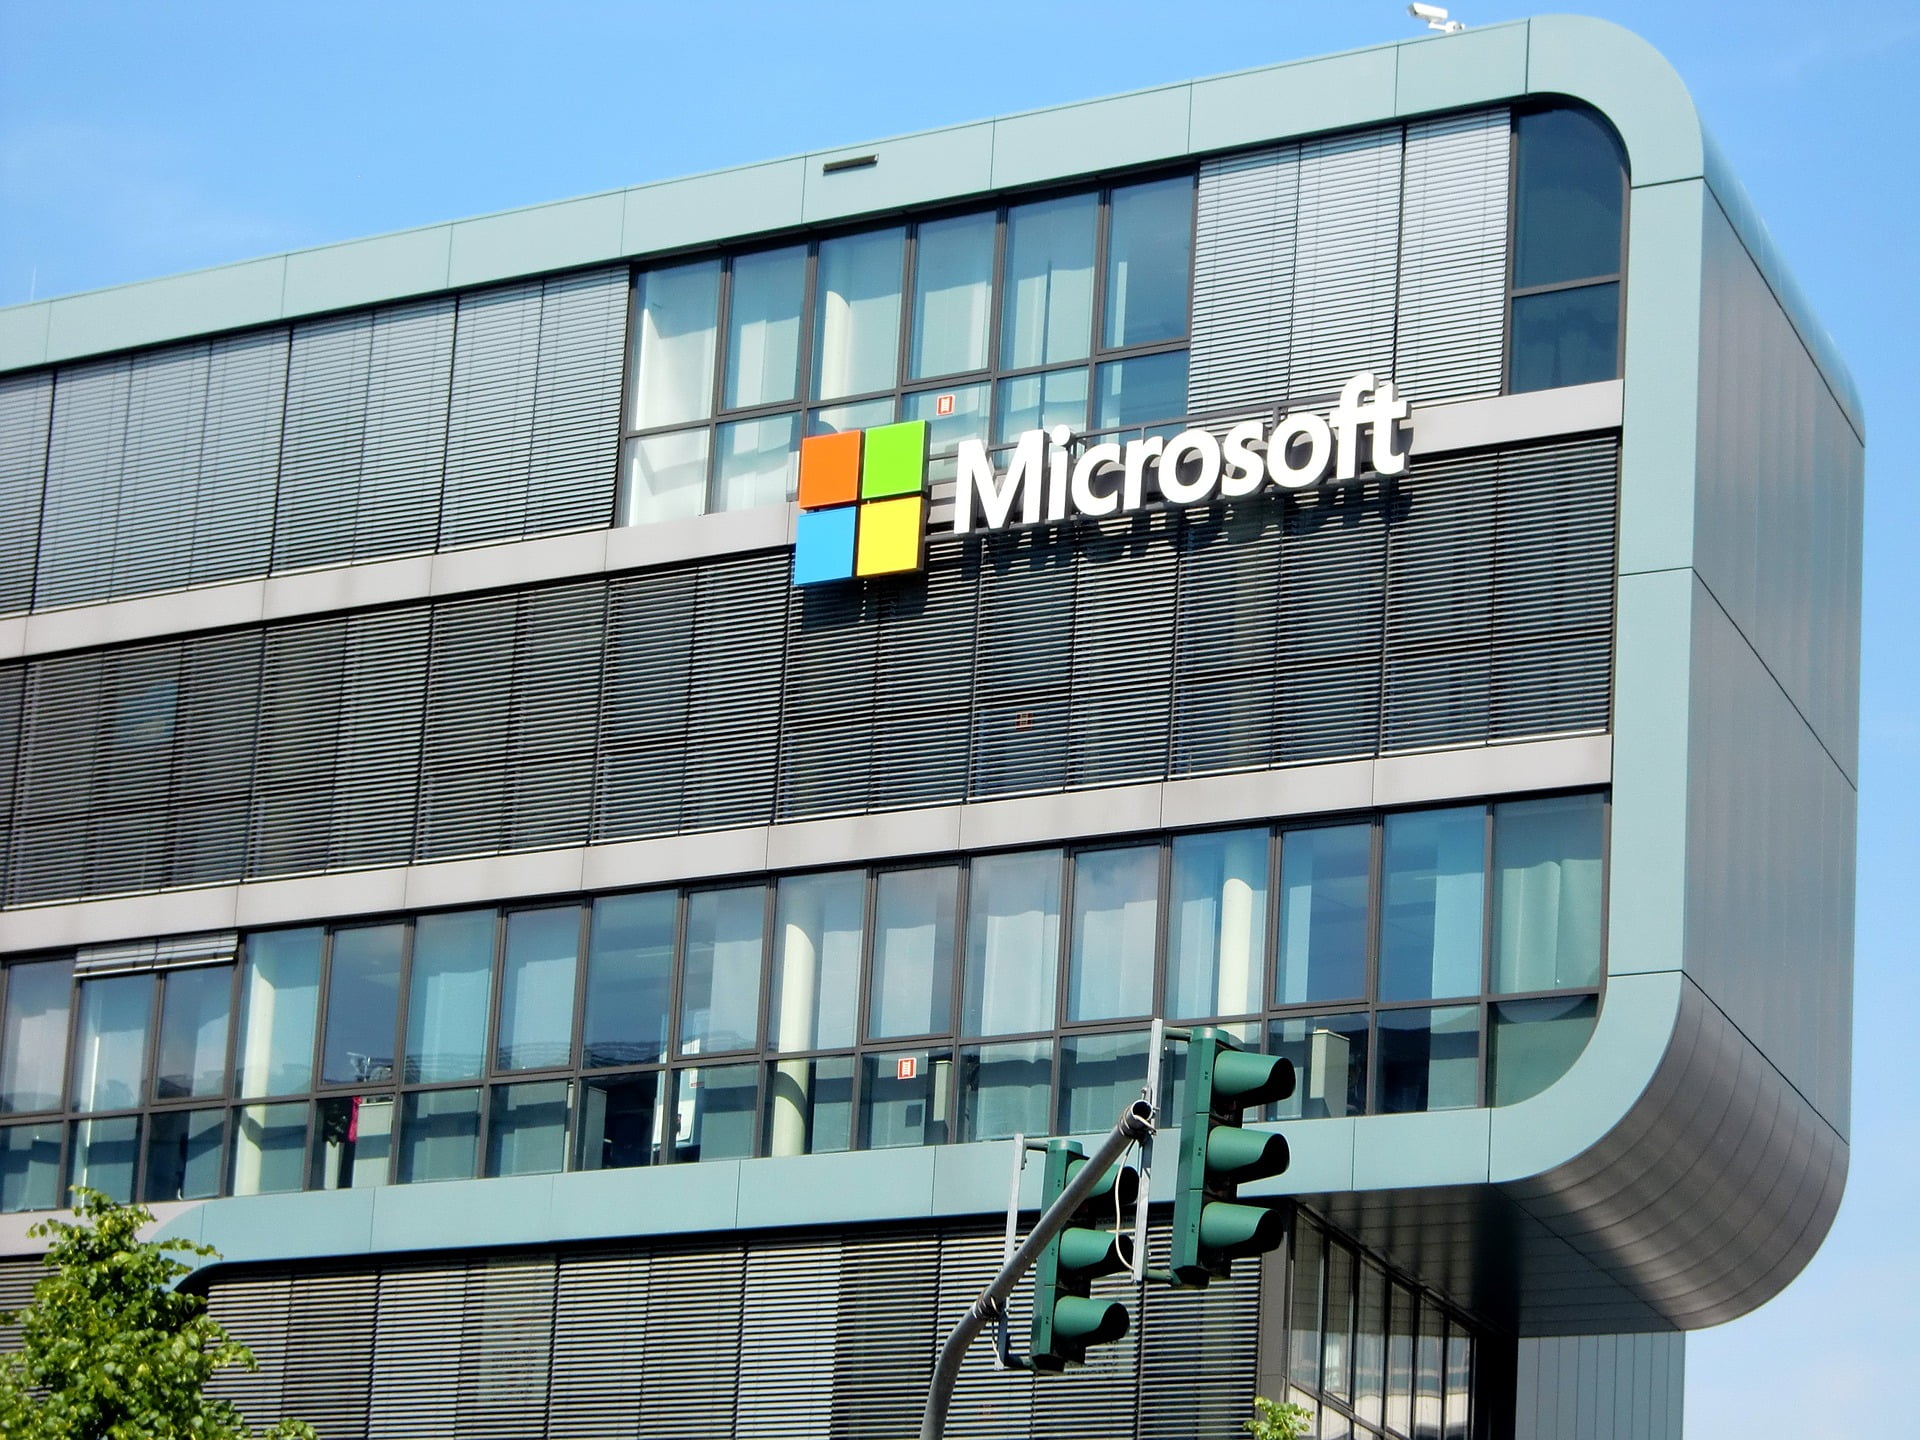 Image of a monumental Microsoft headquarters adorned with the iconic company sign, symbolizing the historic $68.7 Billion acquisition of Activision Blizzard—an epochal shift in the gaming industry landscape. The imposing structure stands as a visual testament to the transformative moment that reshapes the future of gaming under Microsoft's formidable influence.